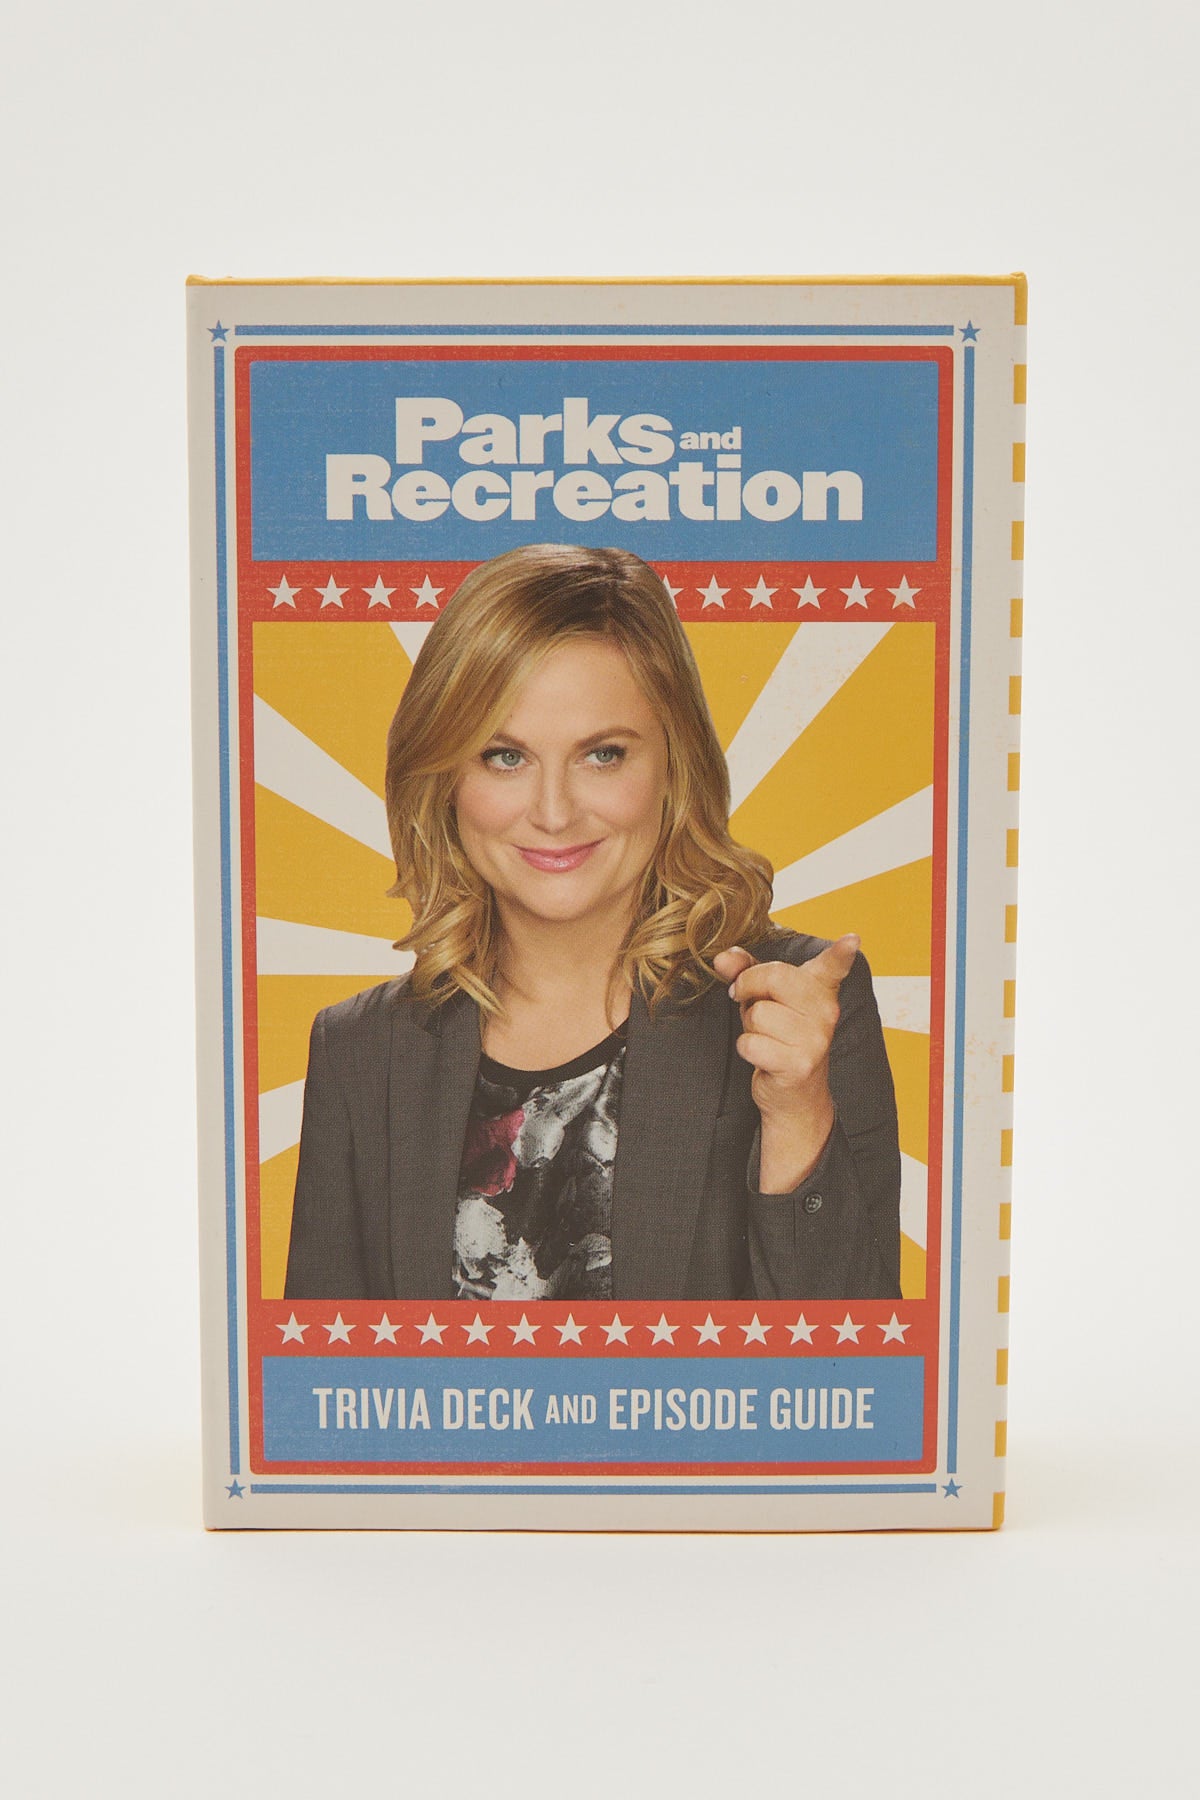 Parks and Recreation: Trivia Deck and Episodes Guide Multi